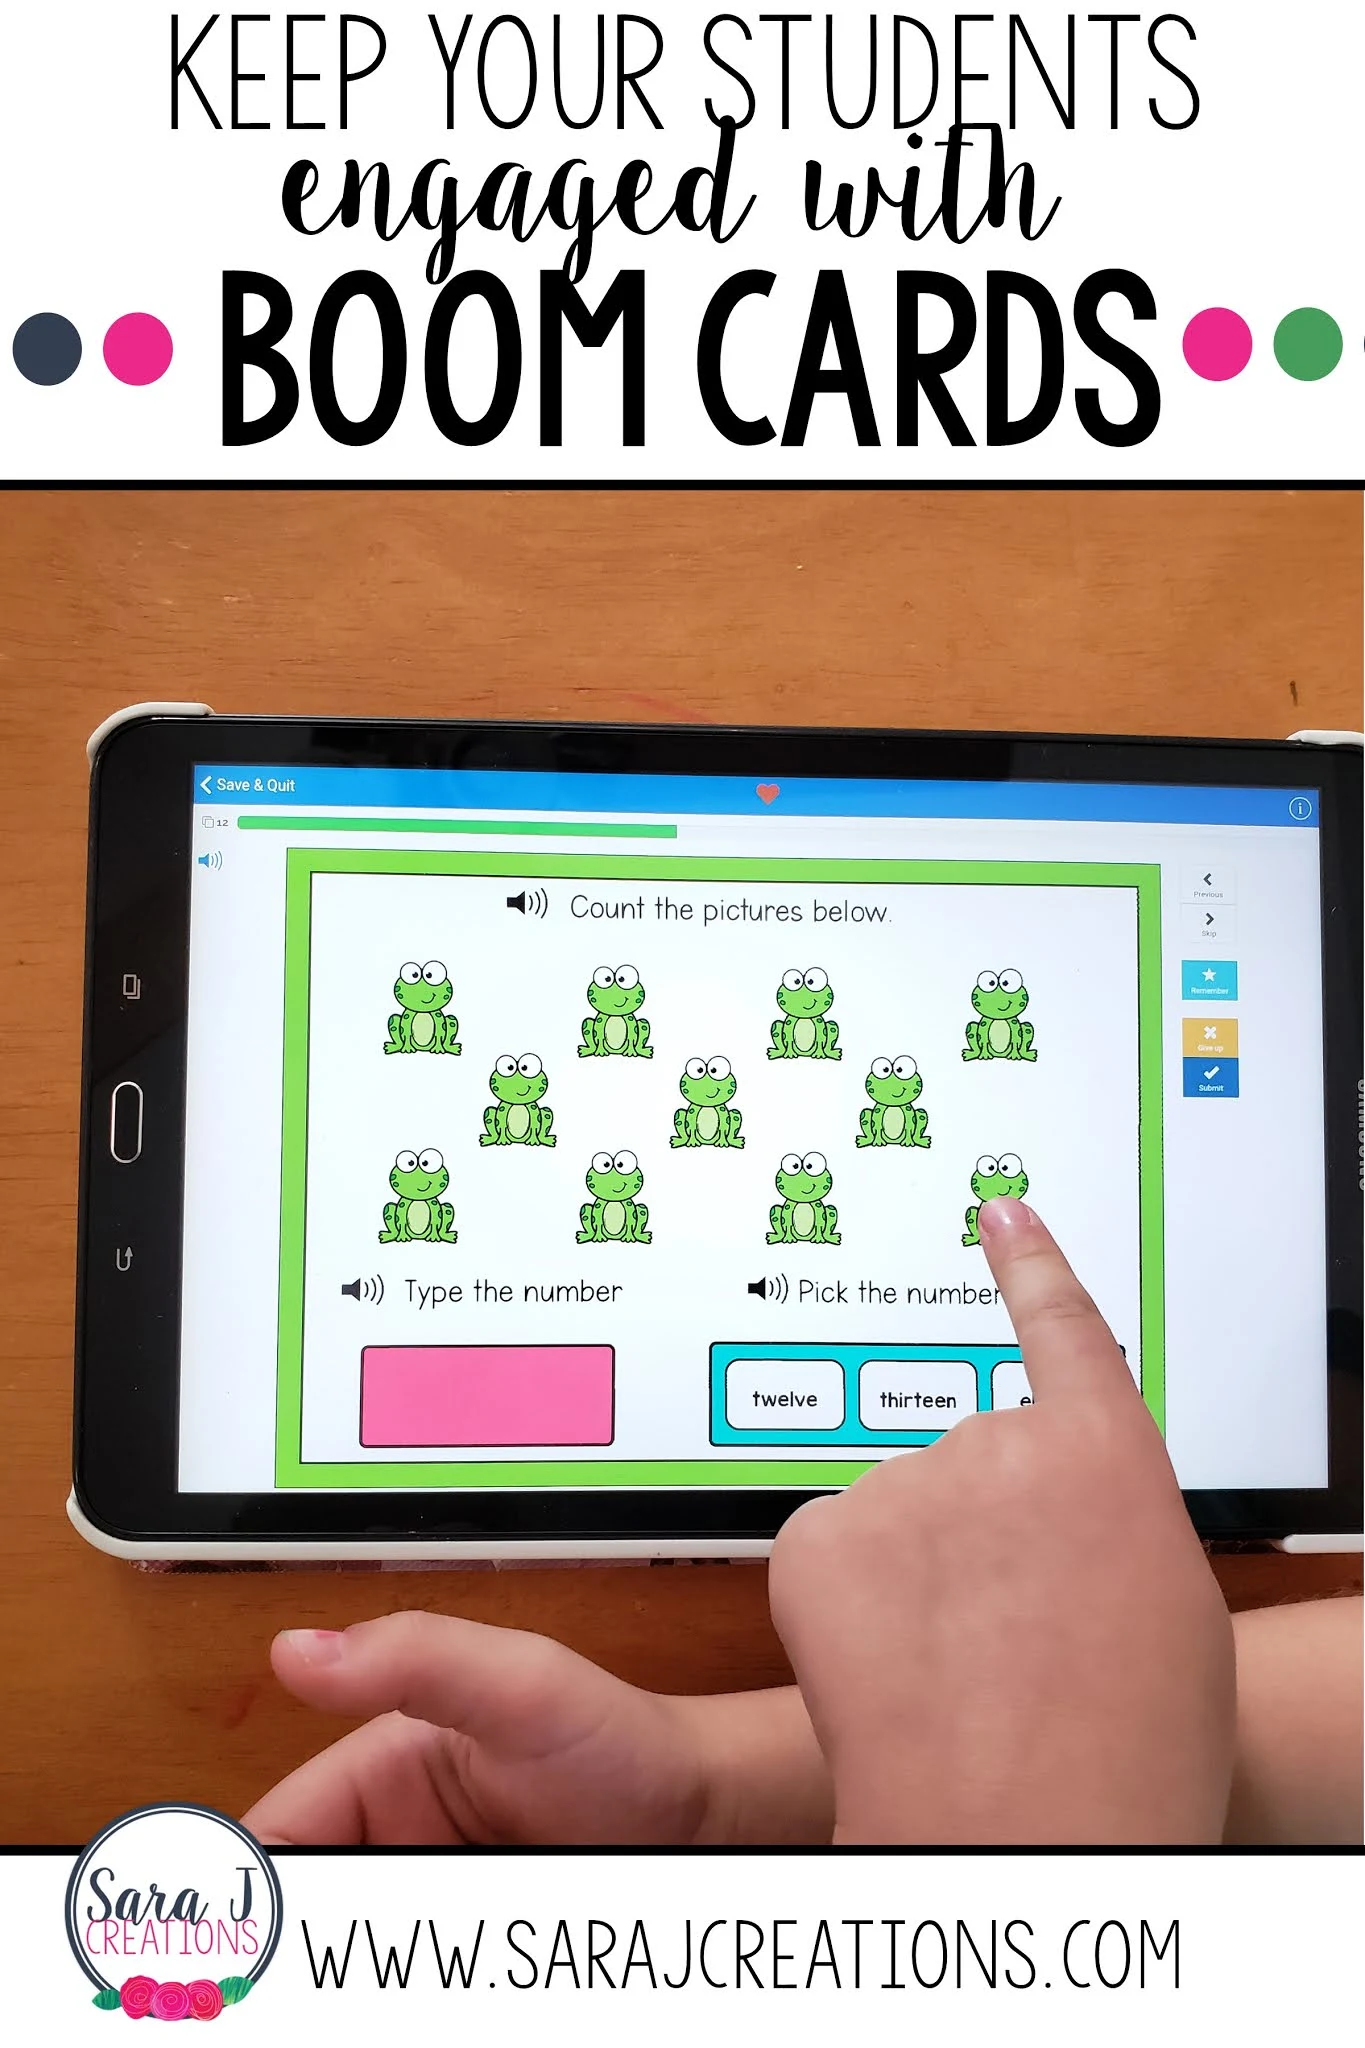 All about Boom Cards from the Boom Learning platform and how to use them in your classroom for fun, engaging activities. Perfect for distance learning